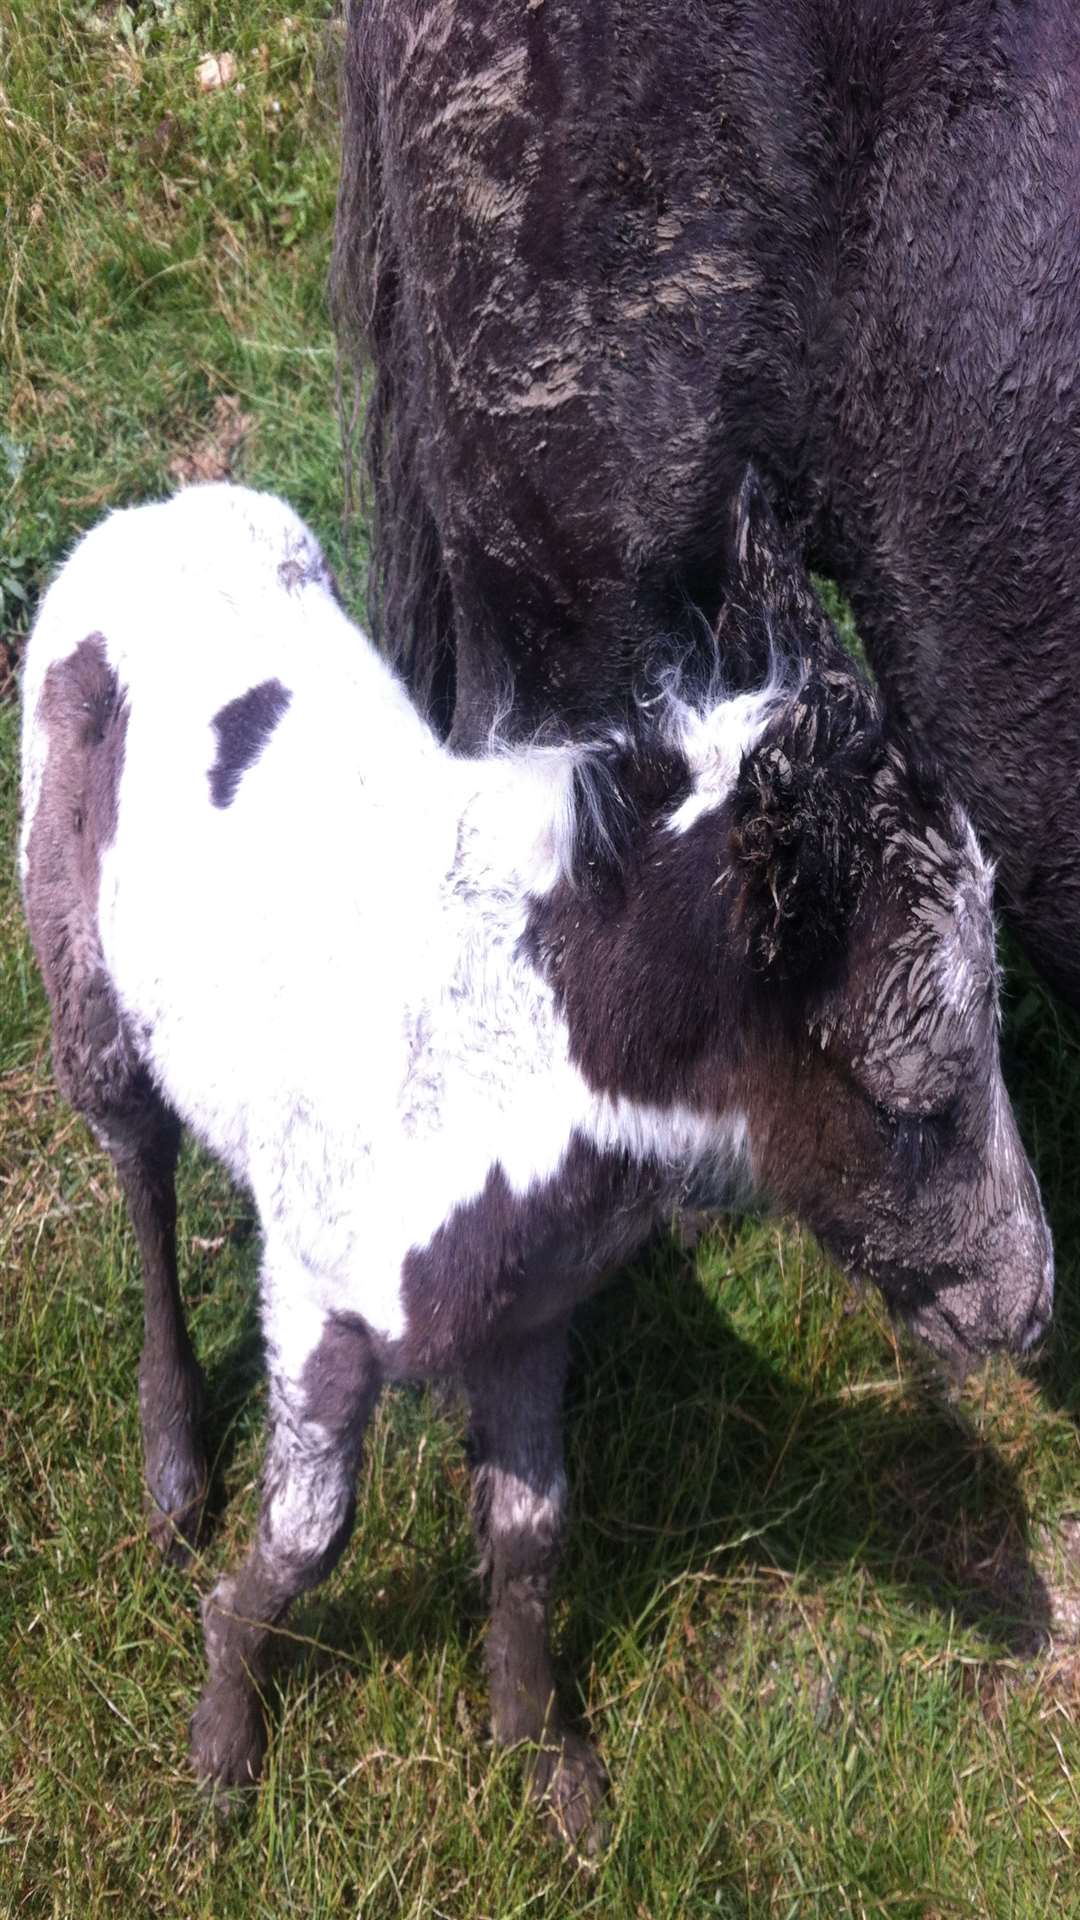 Foal, hours old and caked in mud